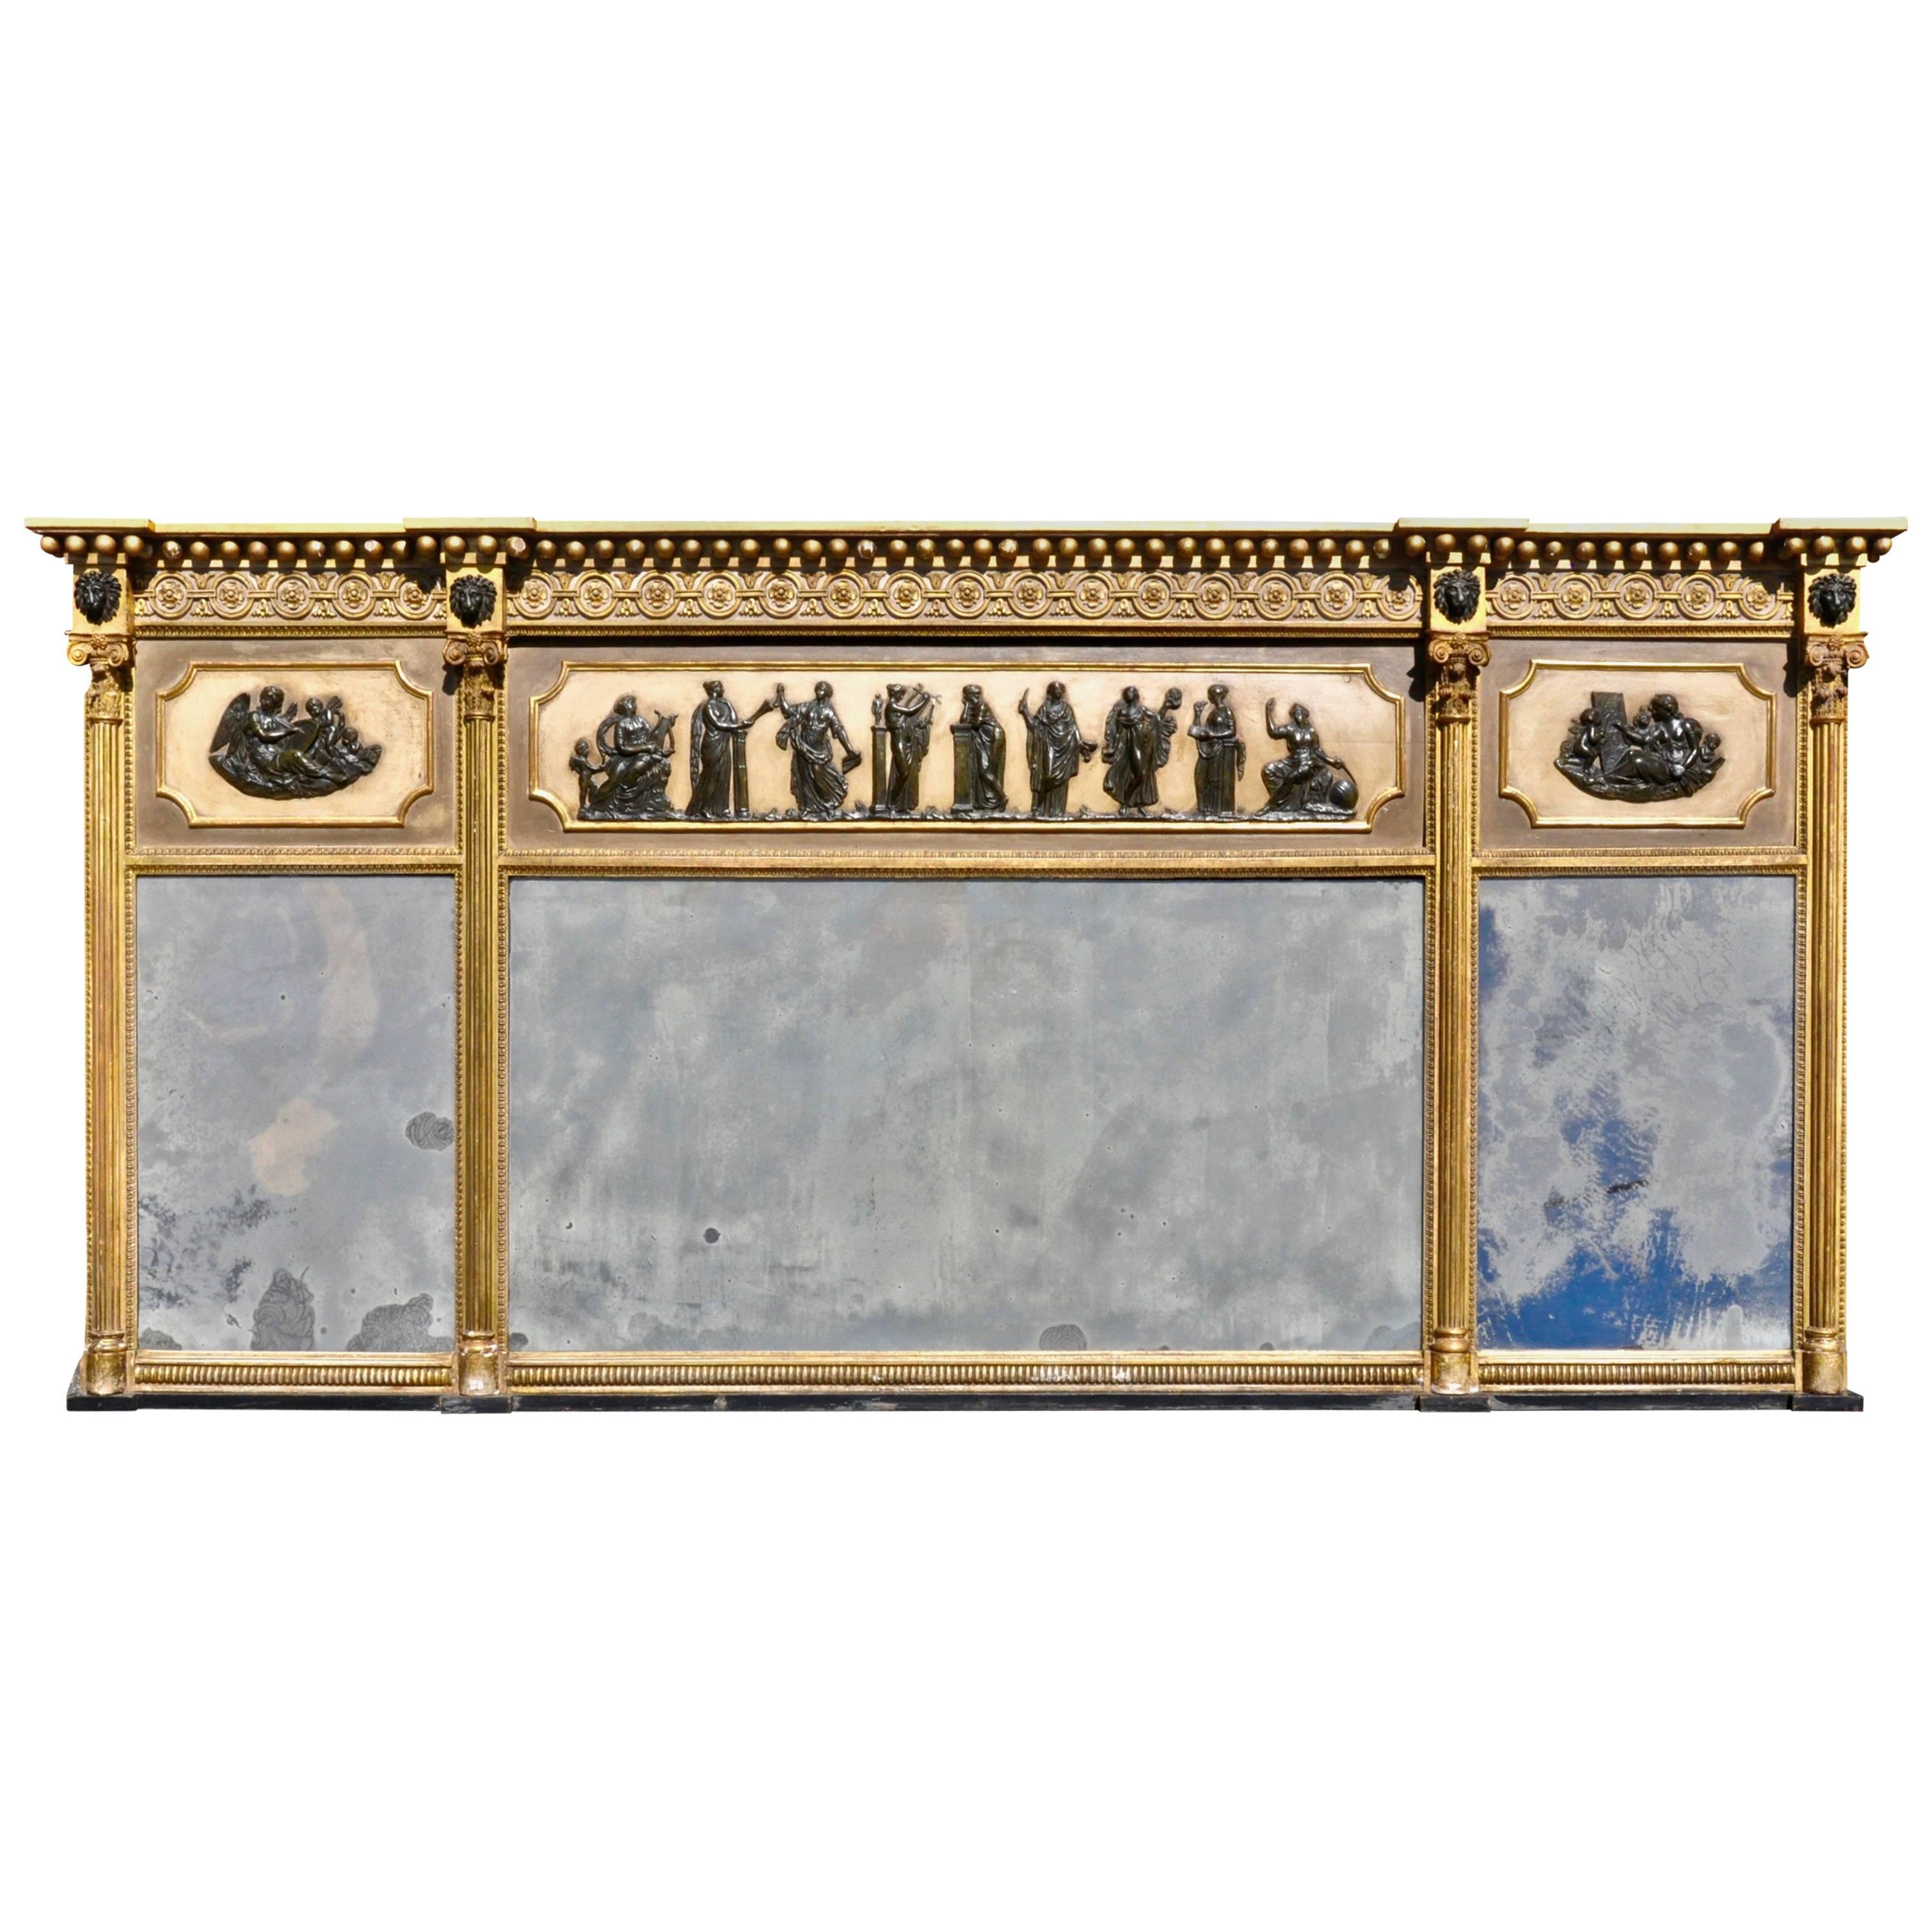 Period Regency Neoclassical Overmantel Mirror, All Original For Sale